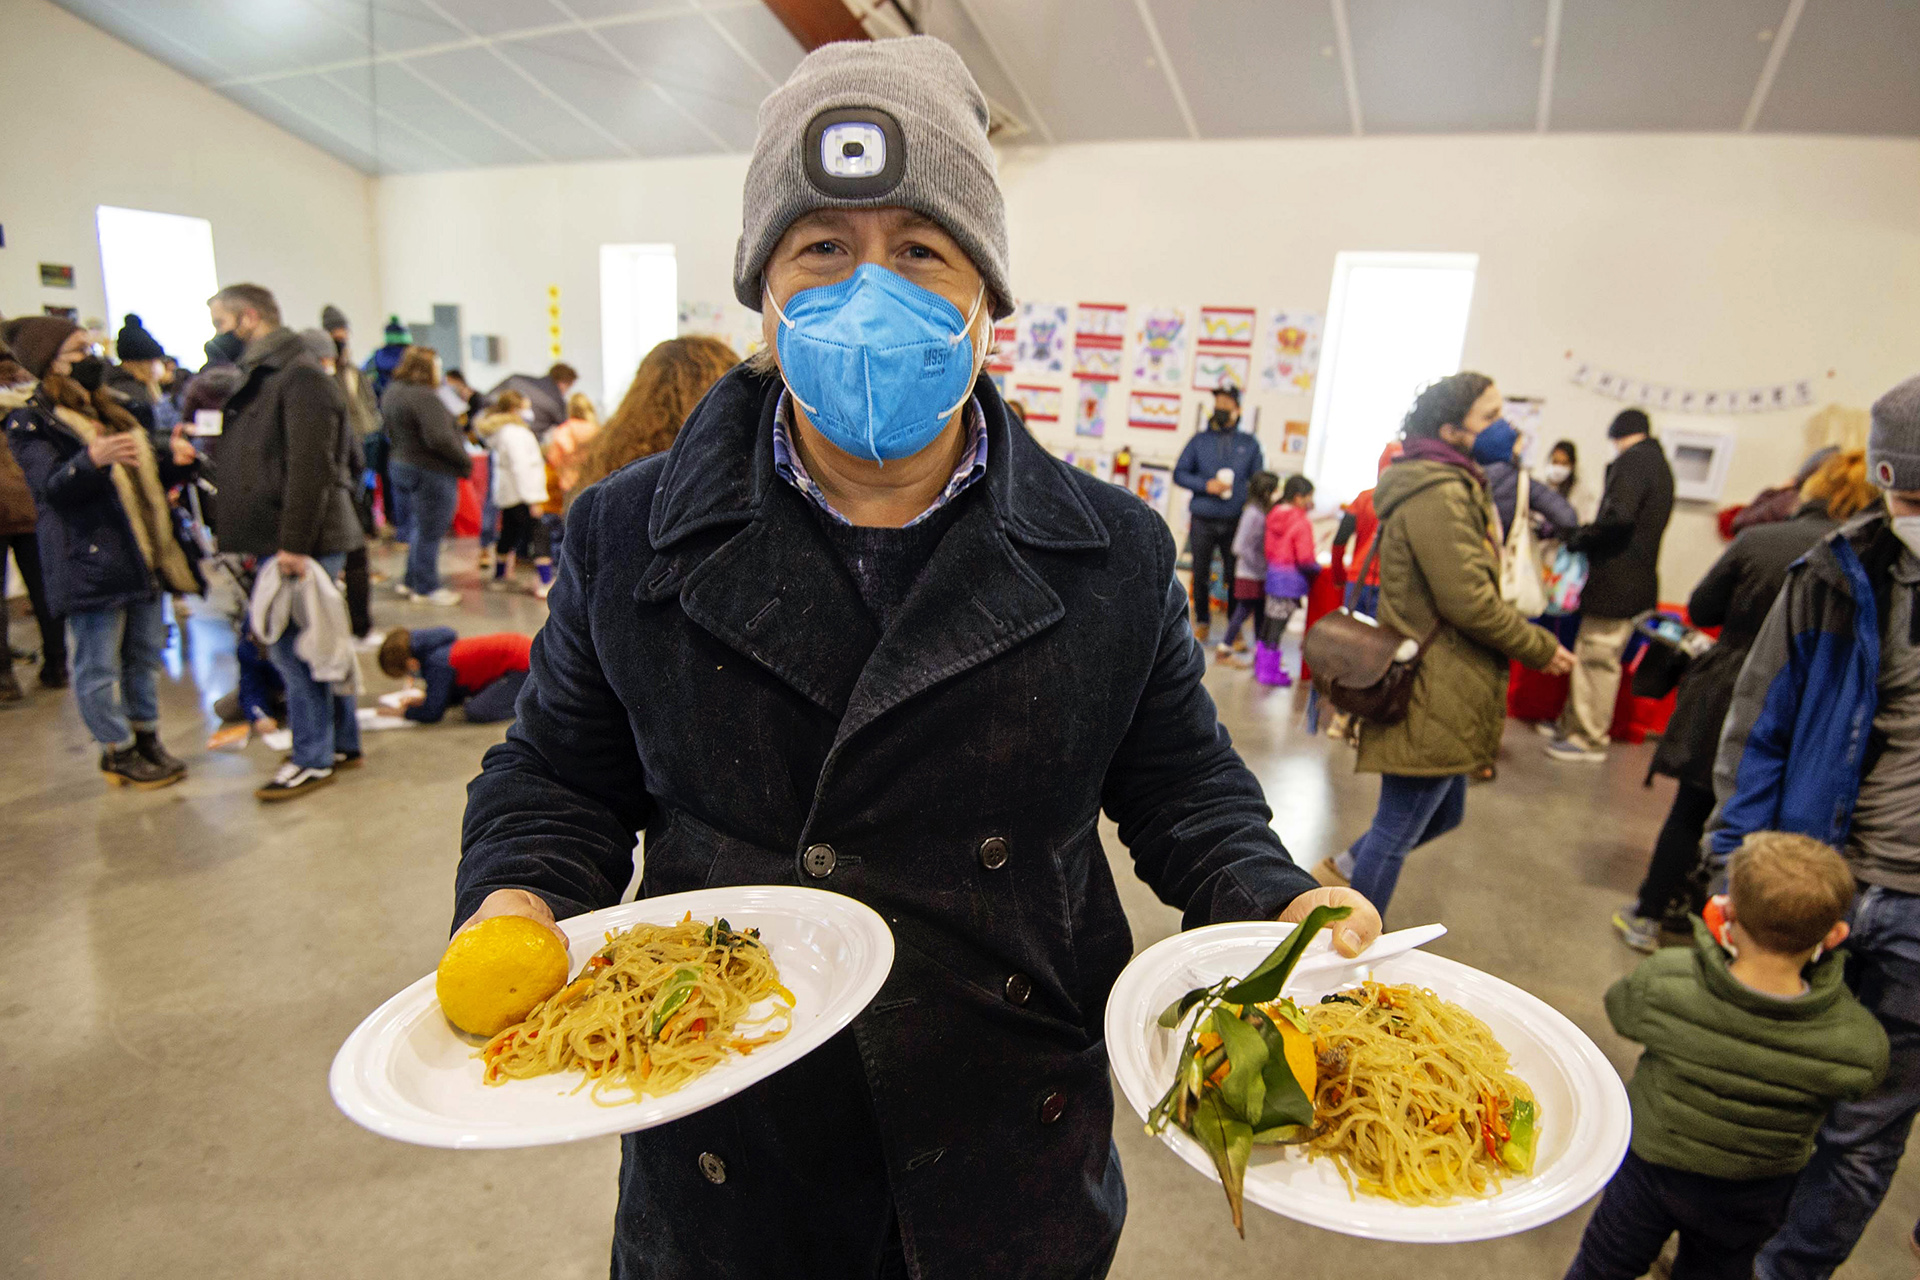 Randolph Kallenberg holds plates of Korean japchae and mandarin oranges during the Lunar New Year Celebration at Legacy Park in Decatur on Saturday, Jan. 29. 2022. Photo by Dean Hesse.